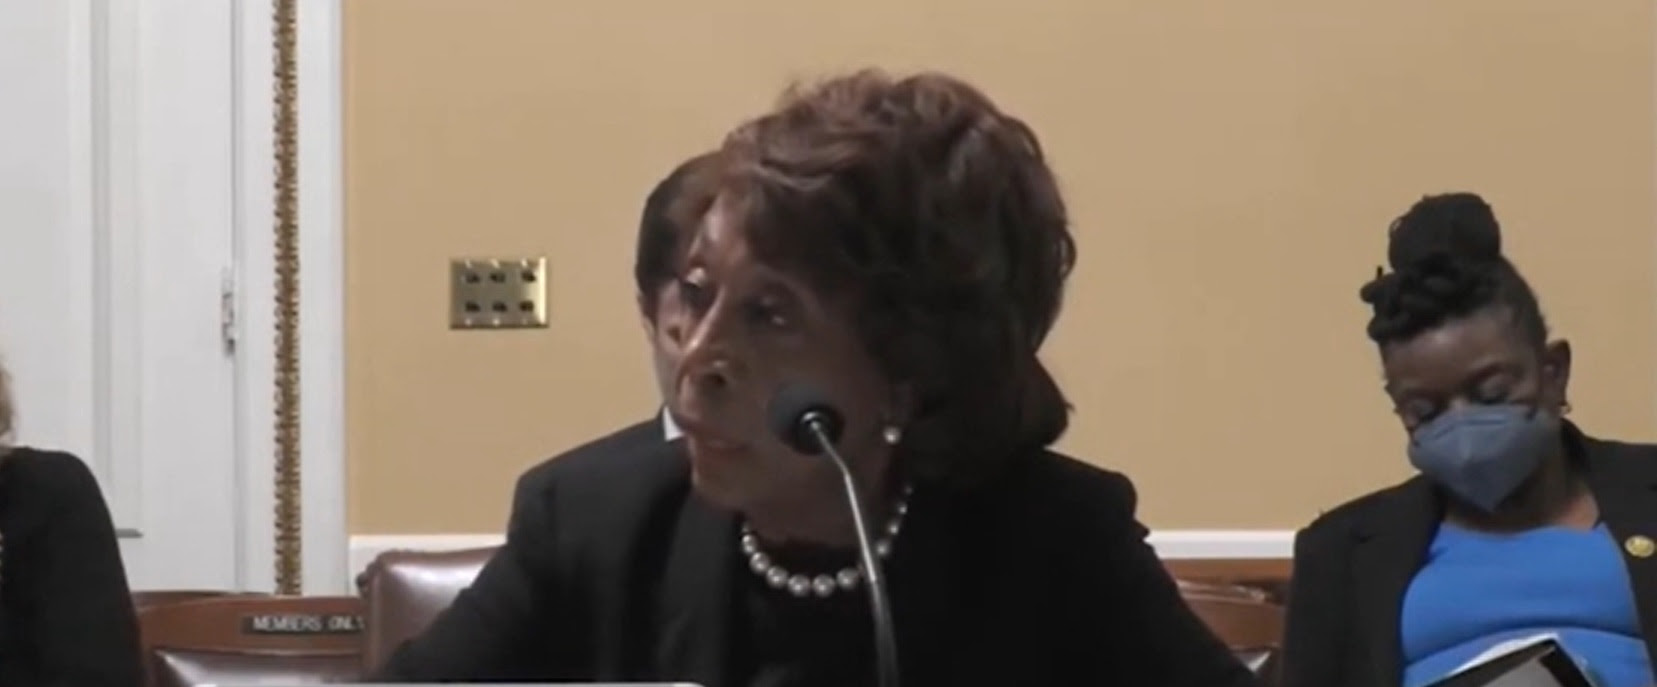 ‘I Am Not A Socialist’: Maxine Waters Spars With Chip Roy During Rules Committee Hearing